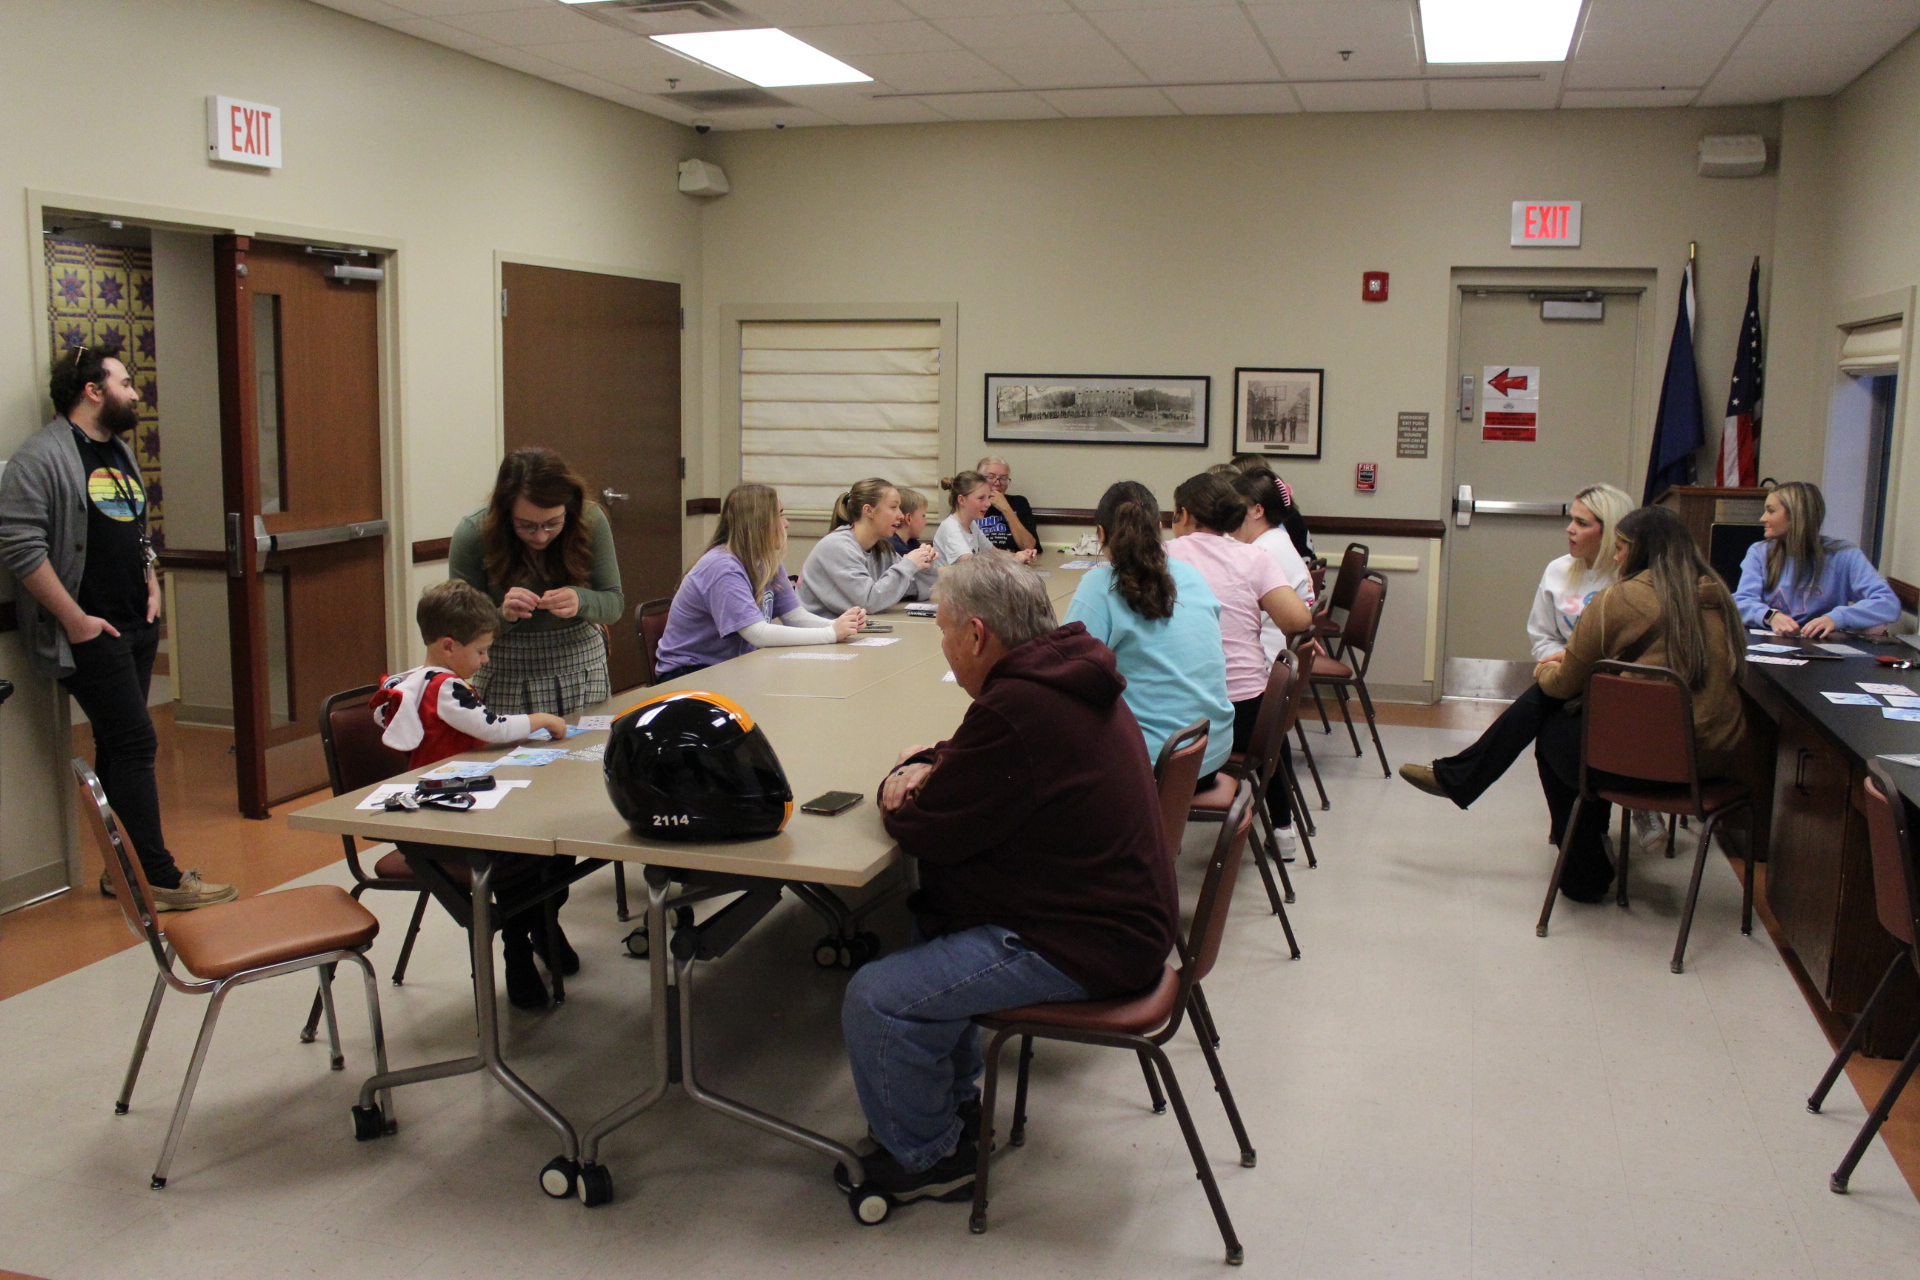 Library patrons creating braille word cards with art supplies